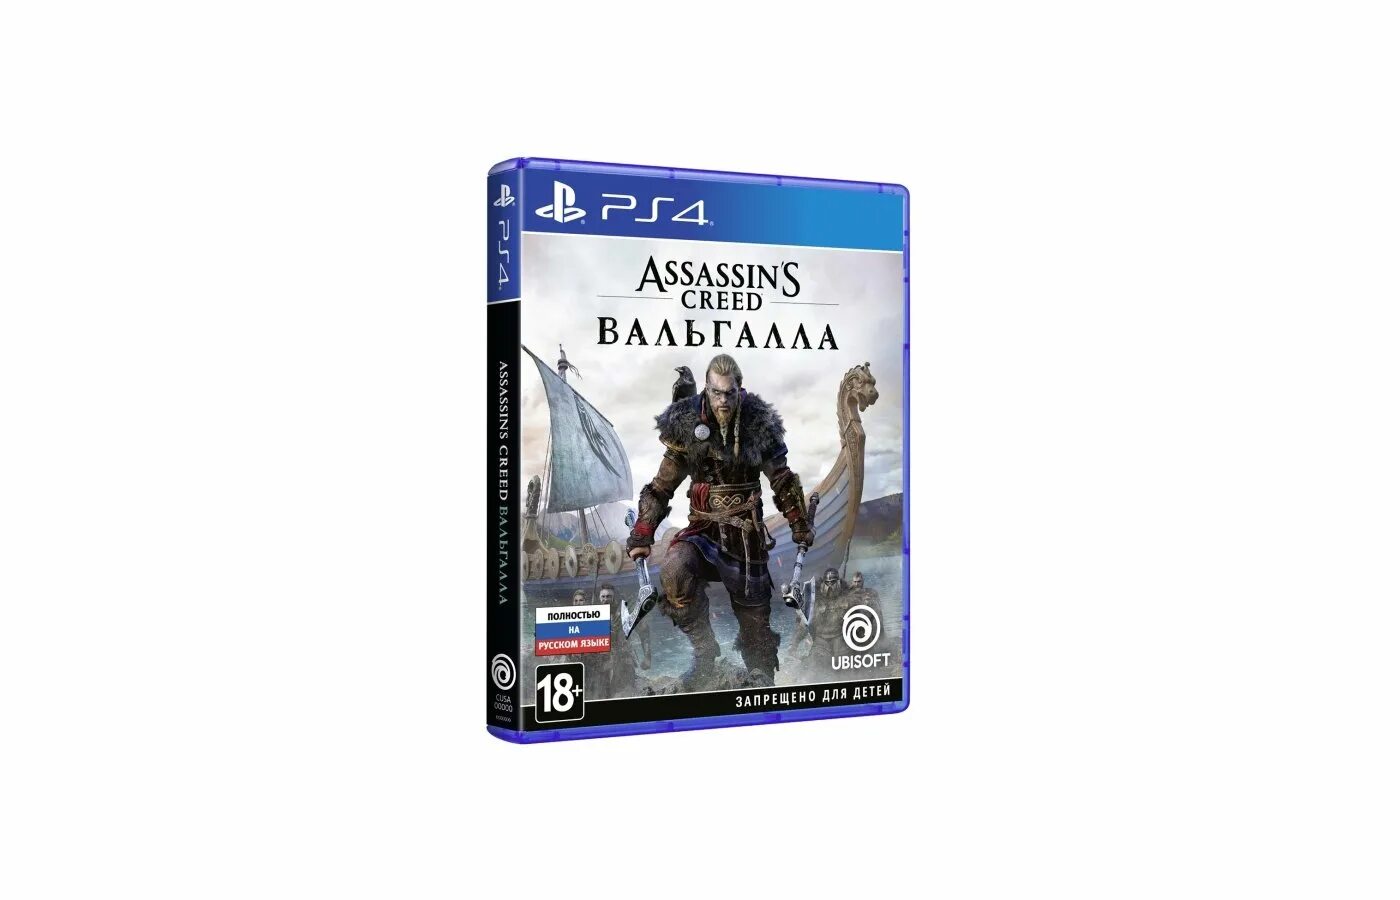 Игра assassins creed ps4. Assassin's Creed Valhalla ps4. Ассасин Крид диск на ПС 4. Ассасин Крид Вальхалла ps4. Assassin's Creed Valhalla ps4 диск.